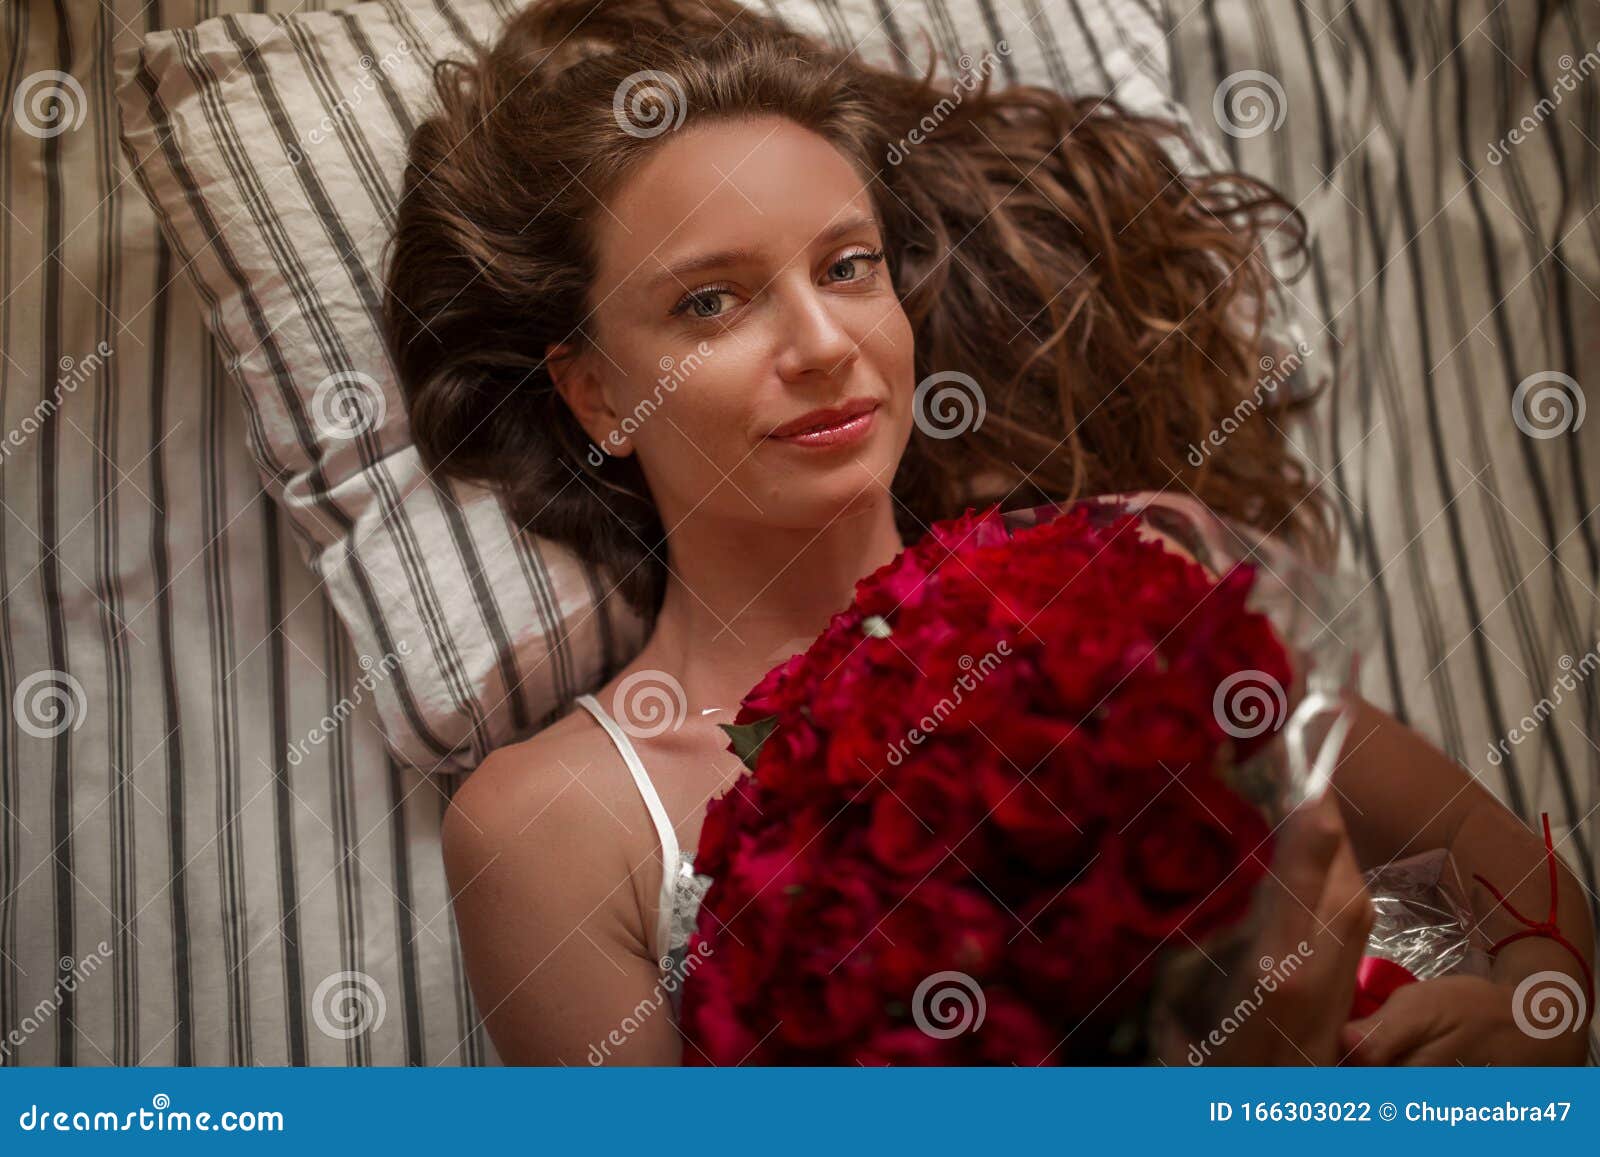 Good Morning Attractive Young Woman in Bed is Holding Bouquet of ...